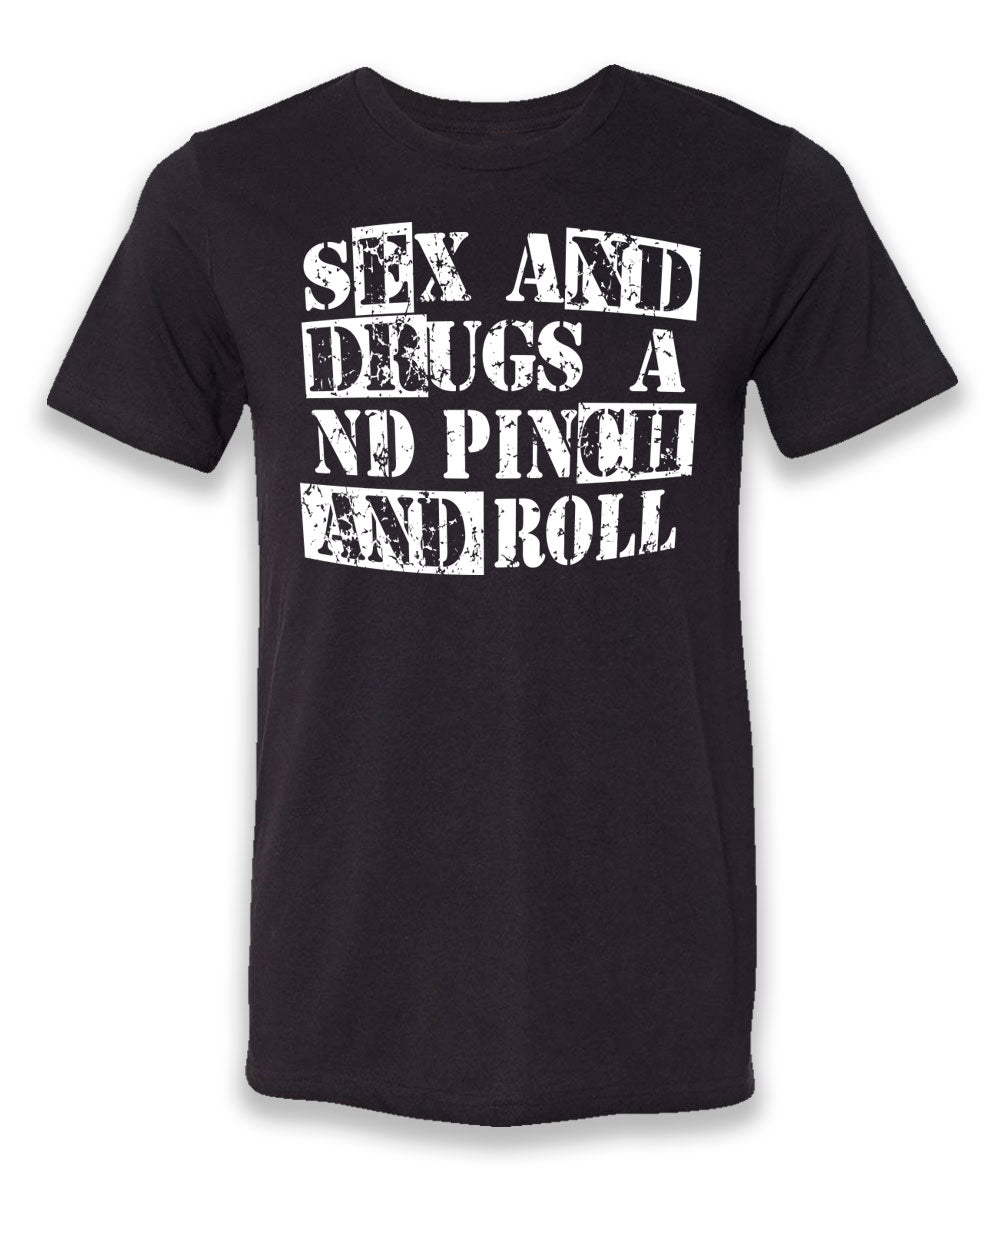 Pinch and Roll T-shirt